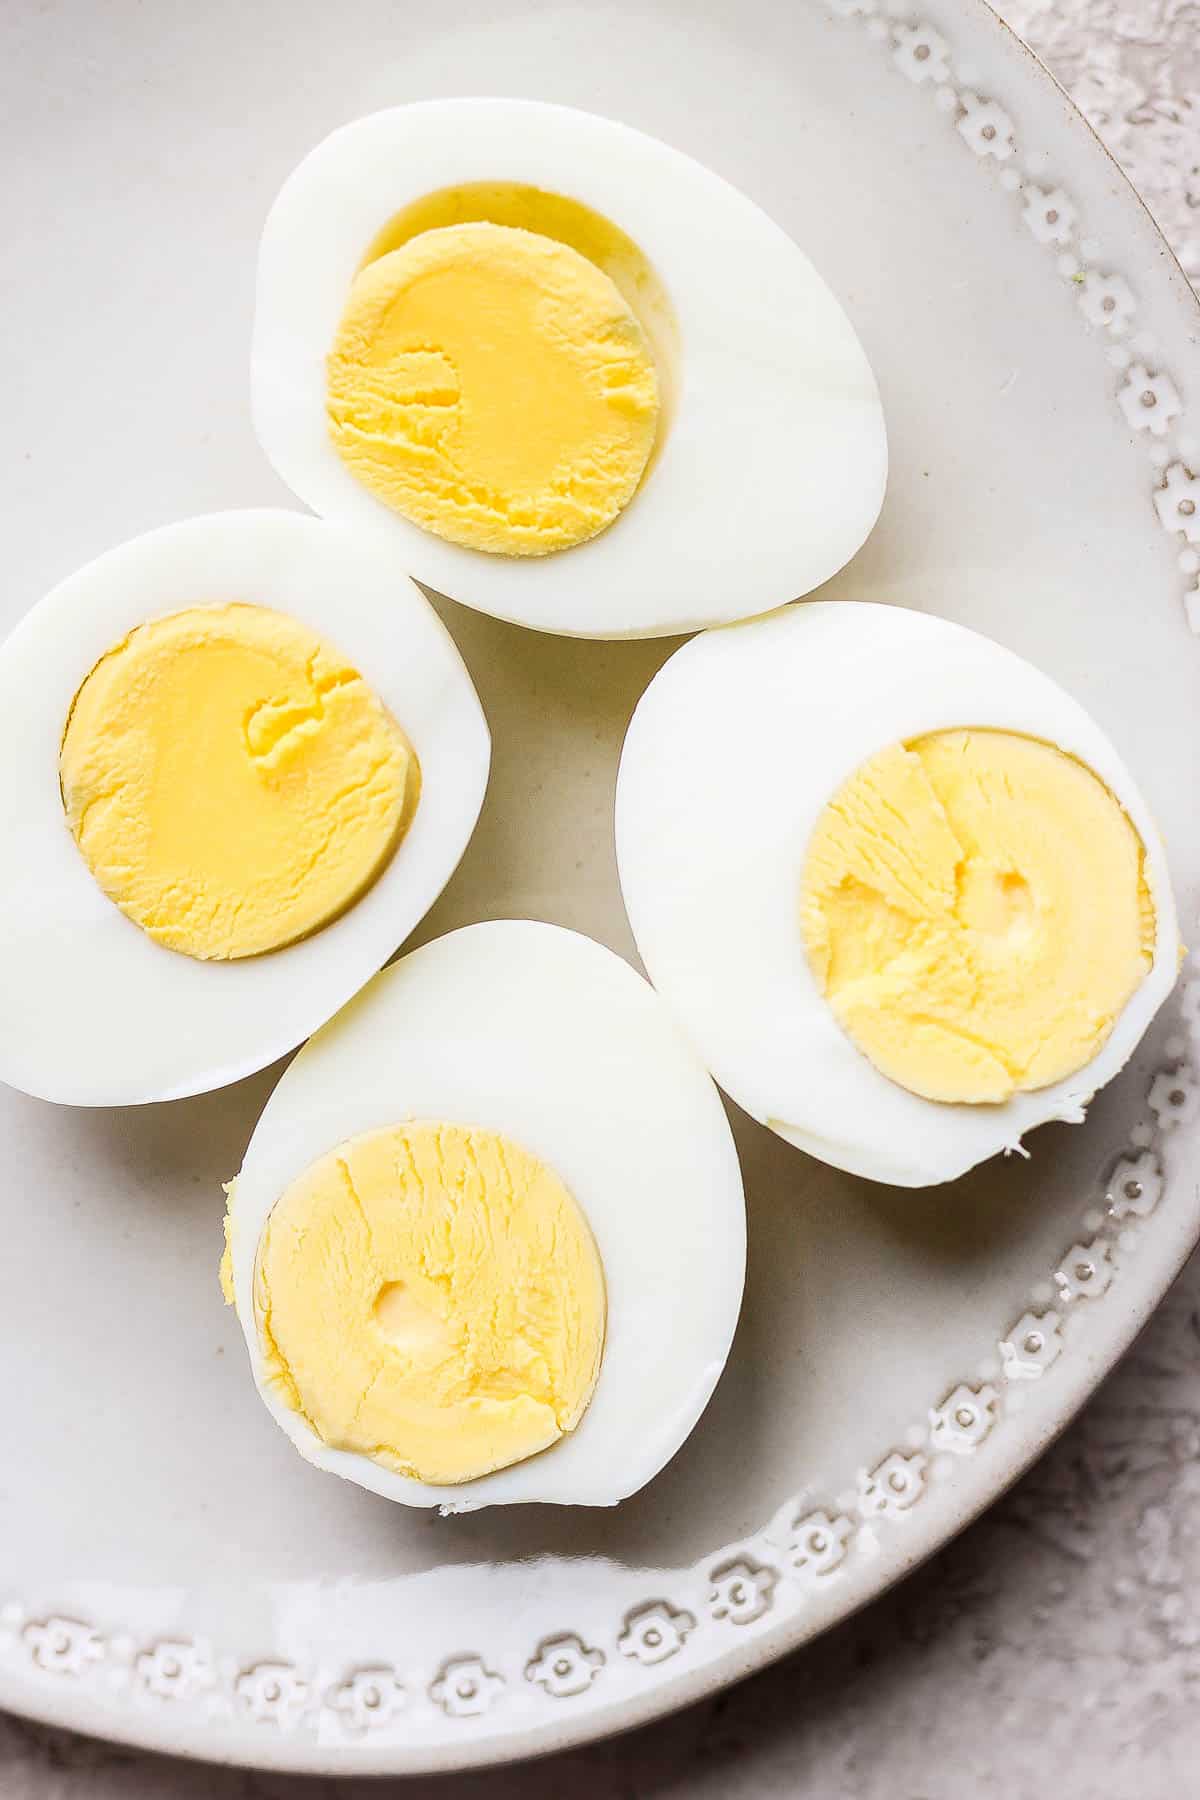 Two hard boiled eggs, cut lengthwise facing yolk side up on a plate.